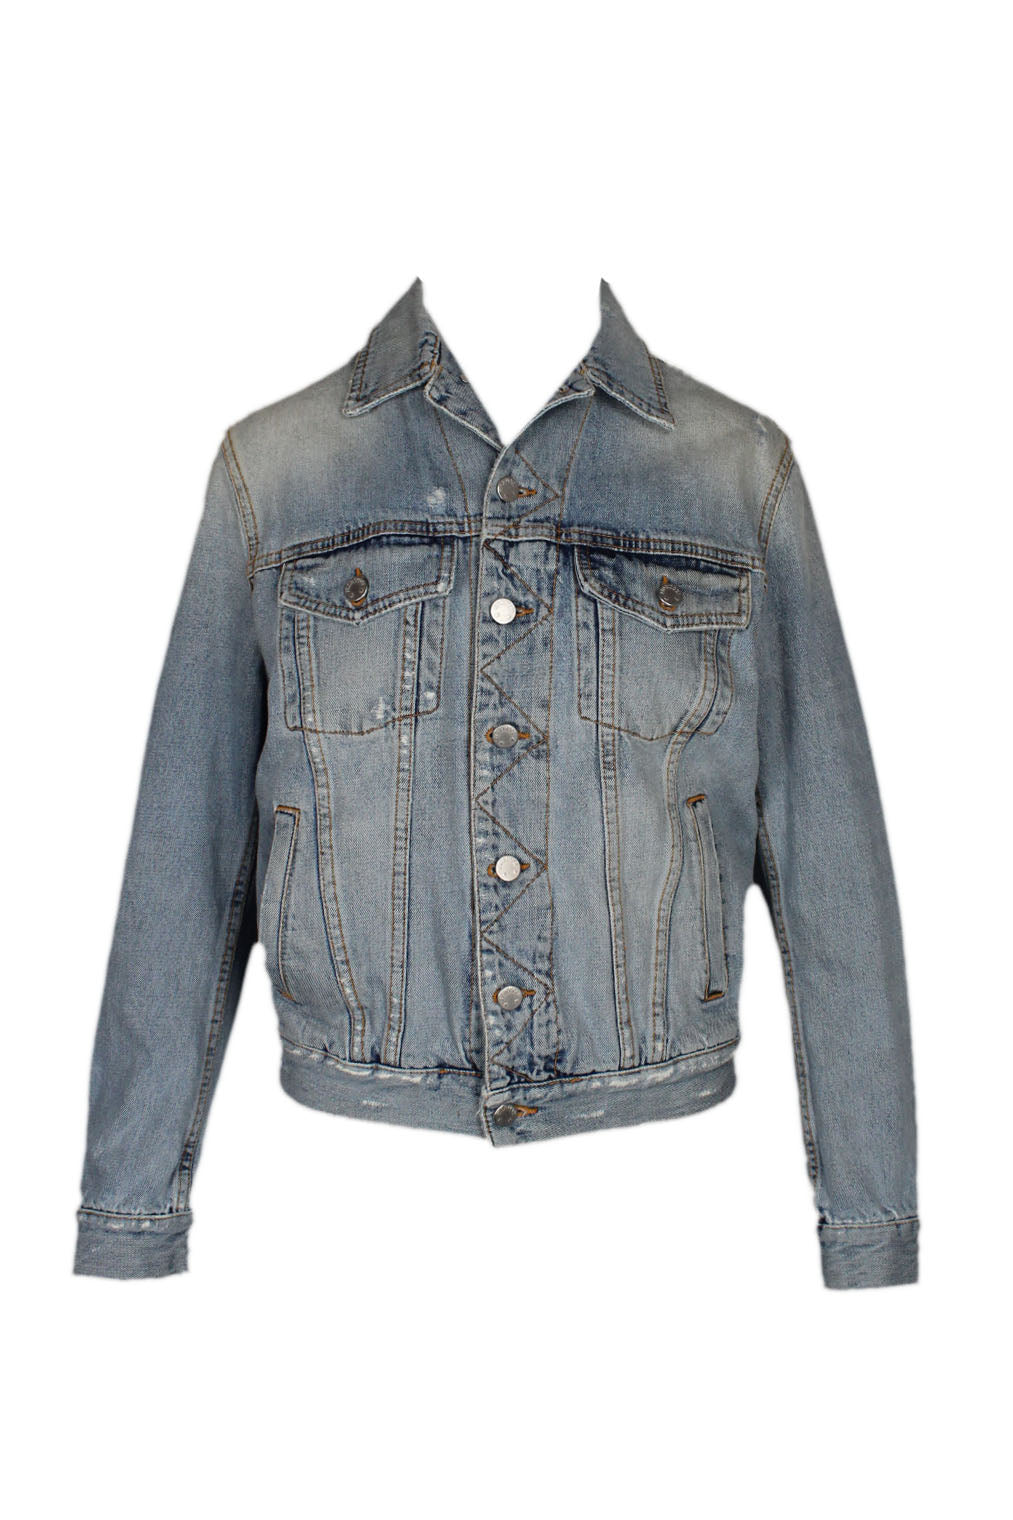 front of  fiorucci blue denim long sleeve trucker jacket. features faded and distressed detail throughout, flap pockets with button closure at bust, side welt pockets, buttoned sleeves, back patch graphic 'fiorucci angels', and button closure.